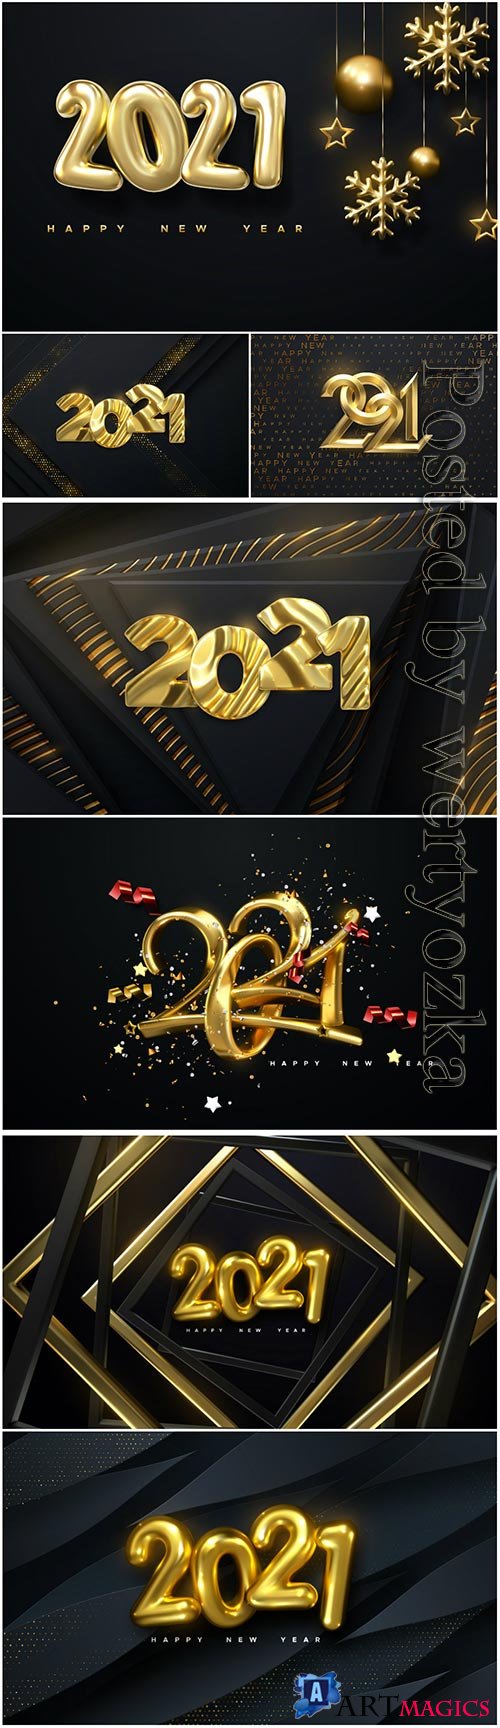 Happy new 2021 year, golden numbers on black background textured